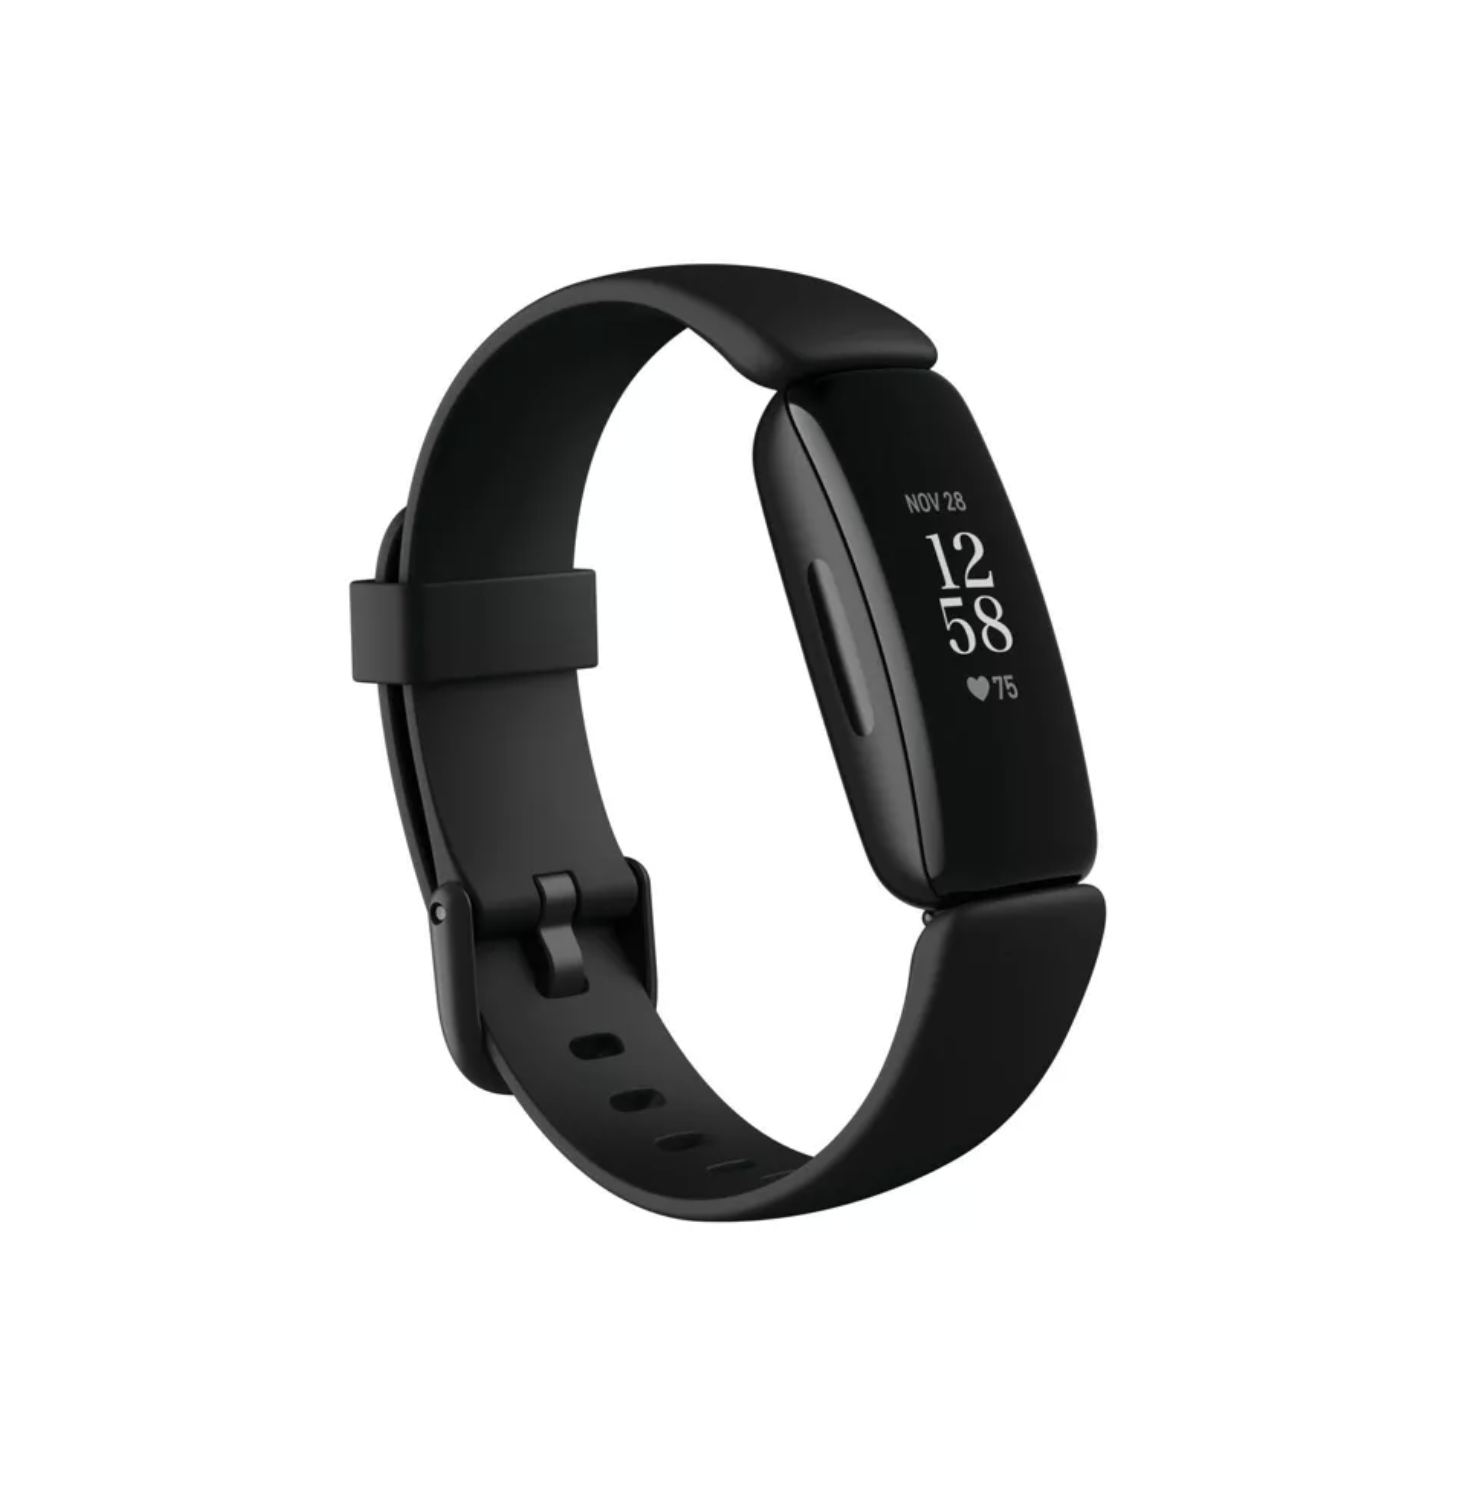 A black Fitbit activity tracker